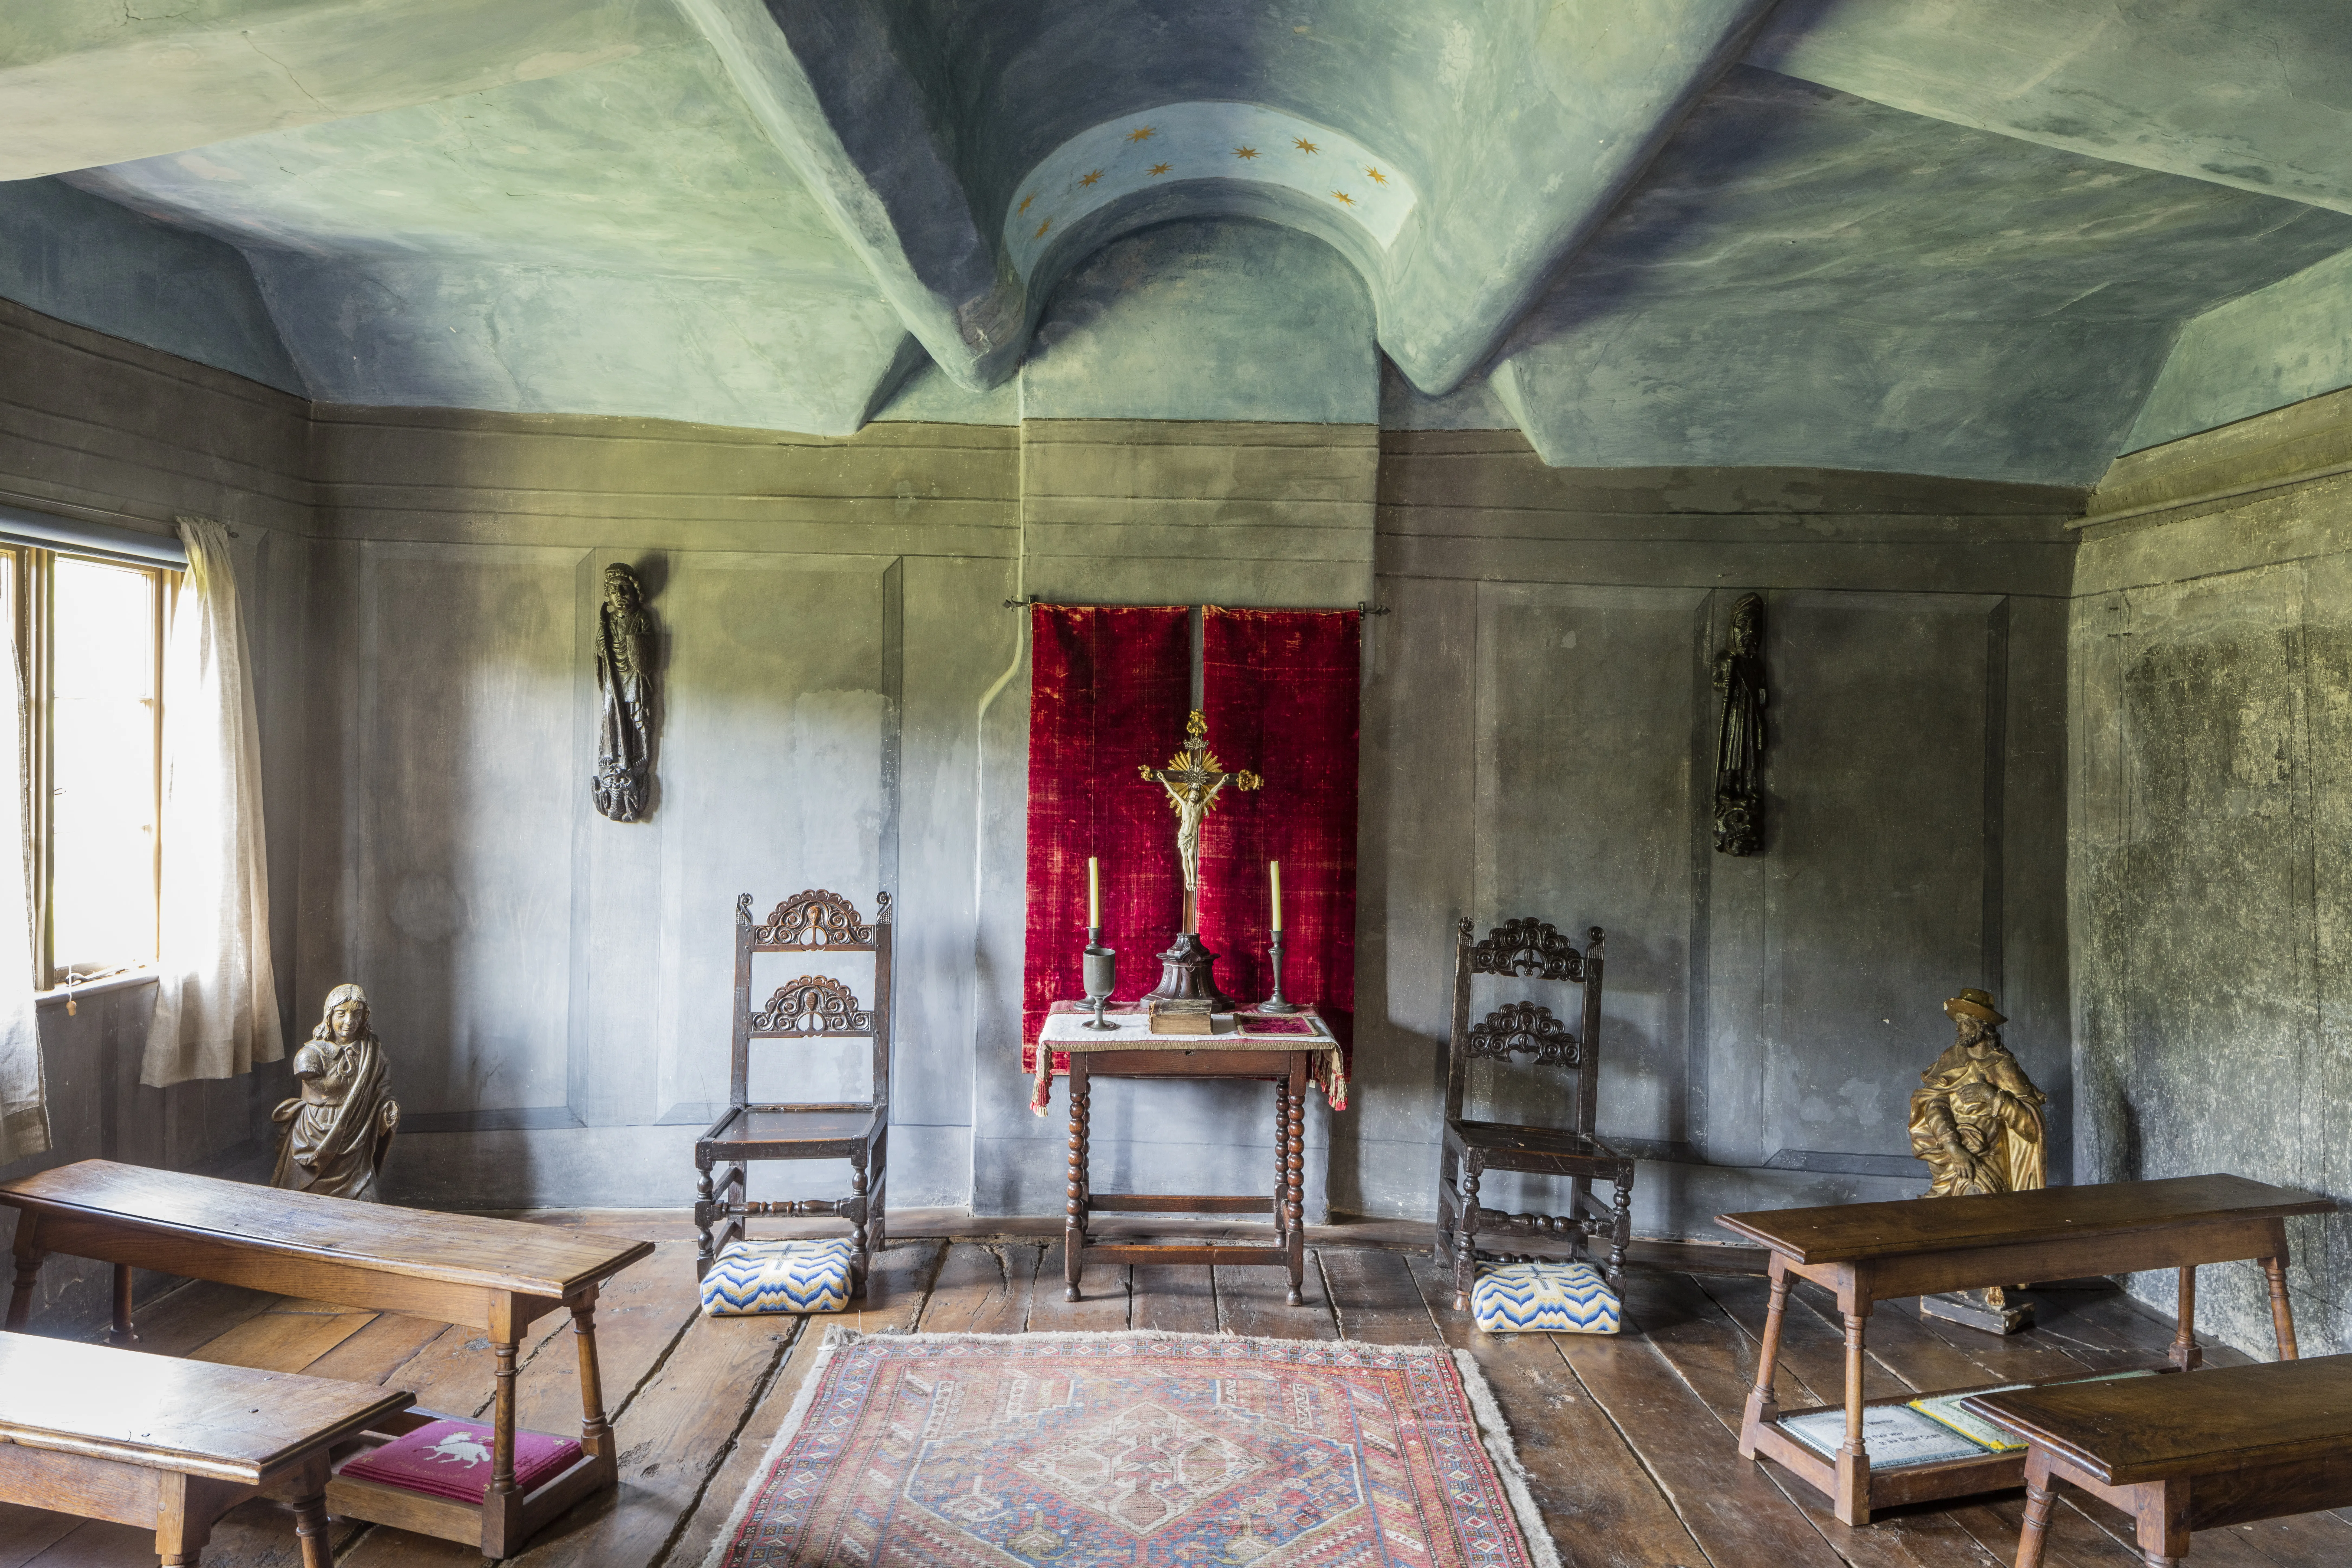 The altar in the Attic Chapel at Moseley Old Hall. Photo courtesy of the National Trust